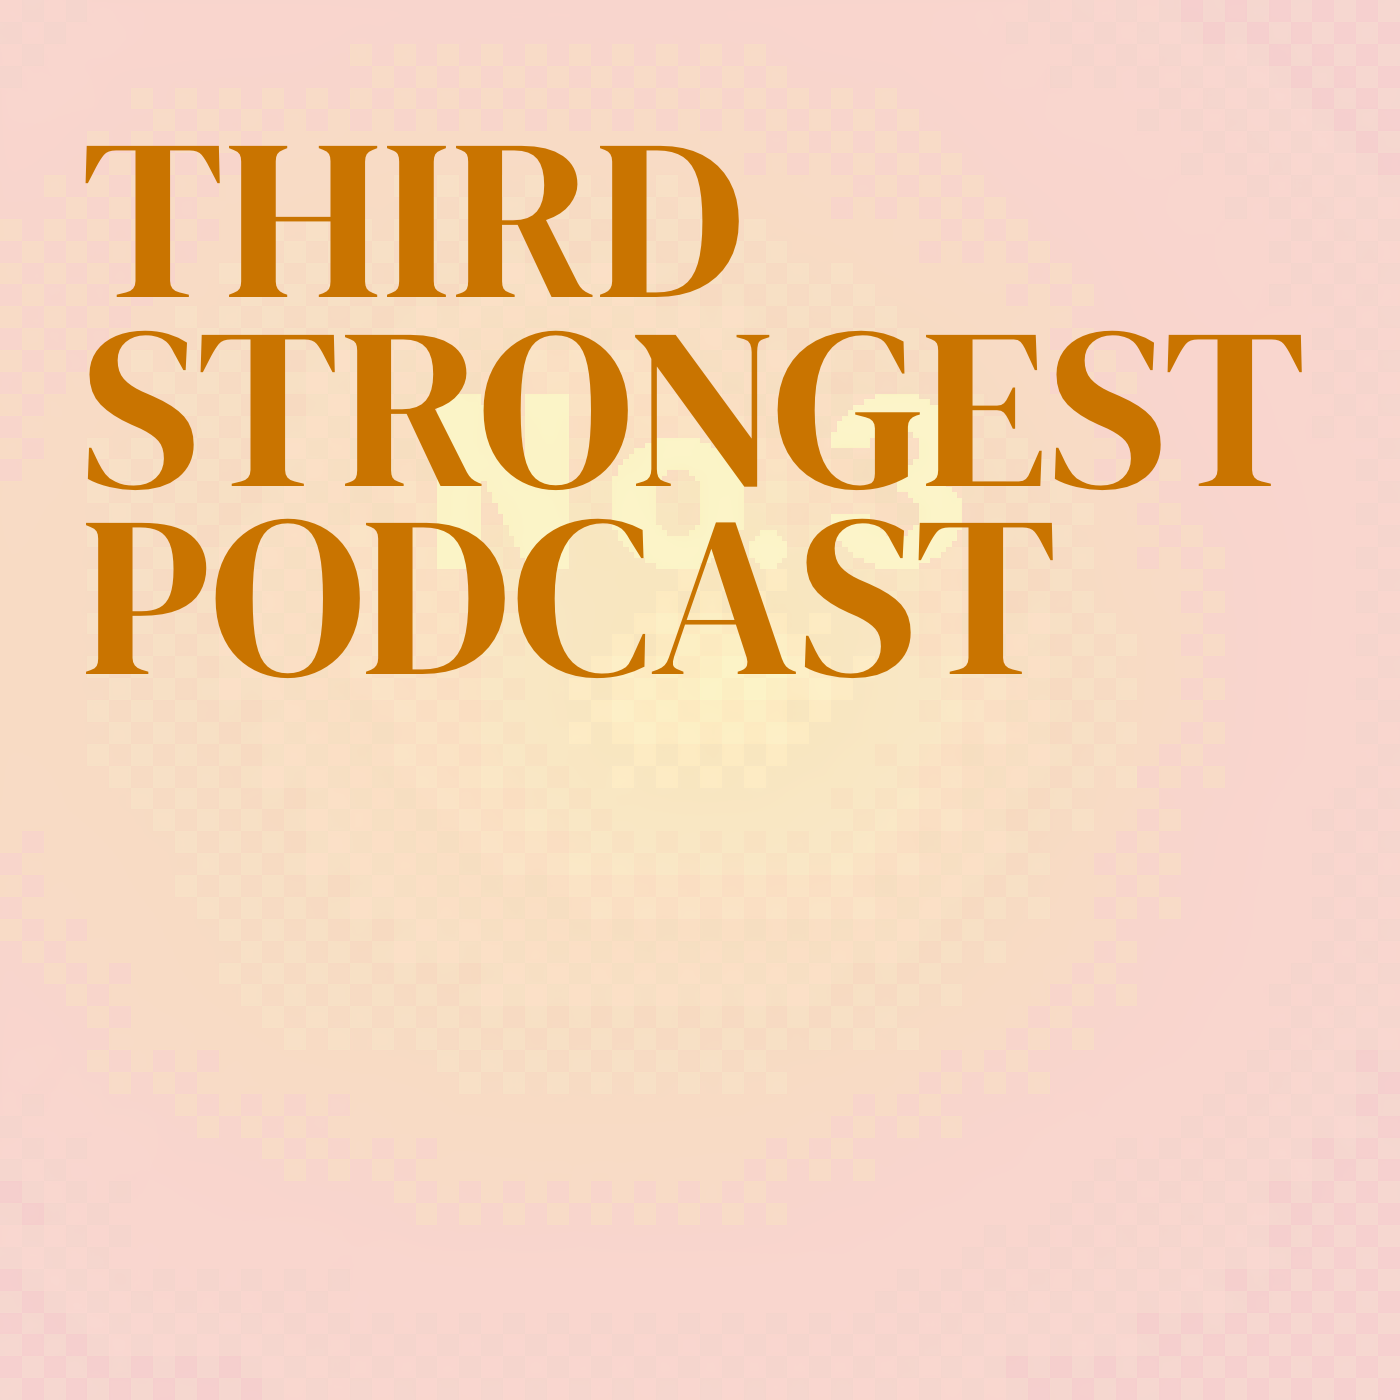 Third Strongest Podcast